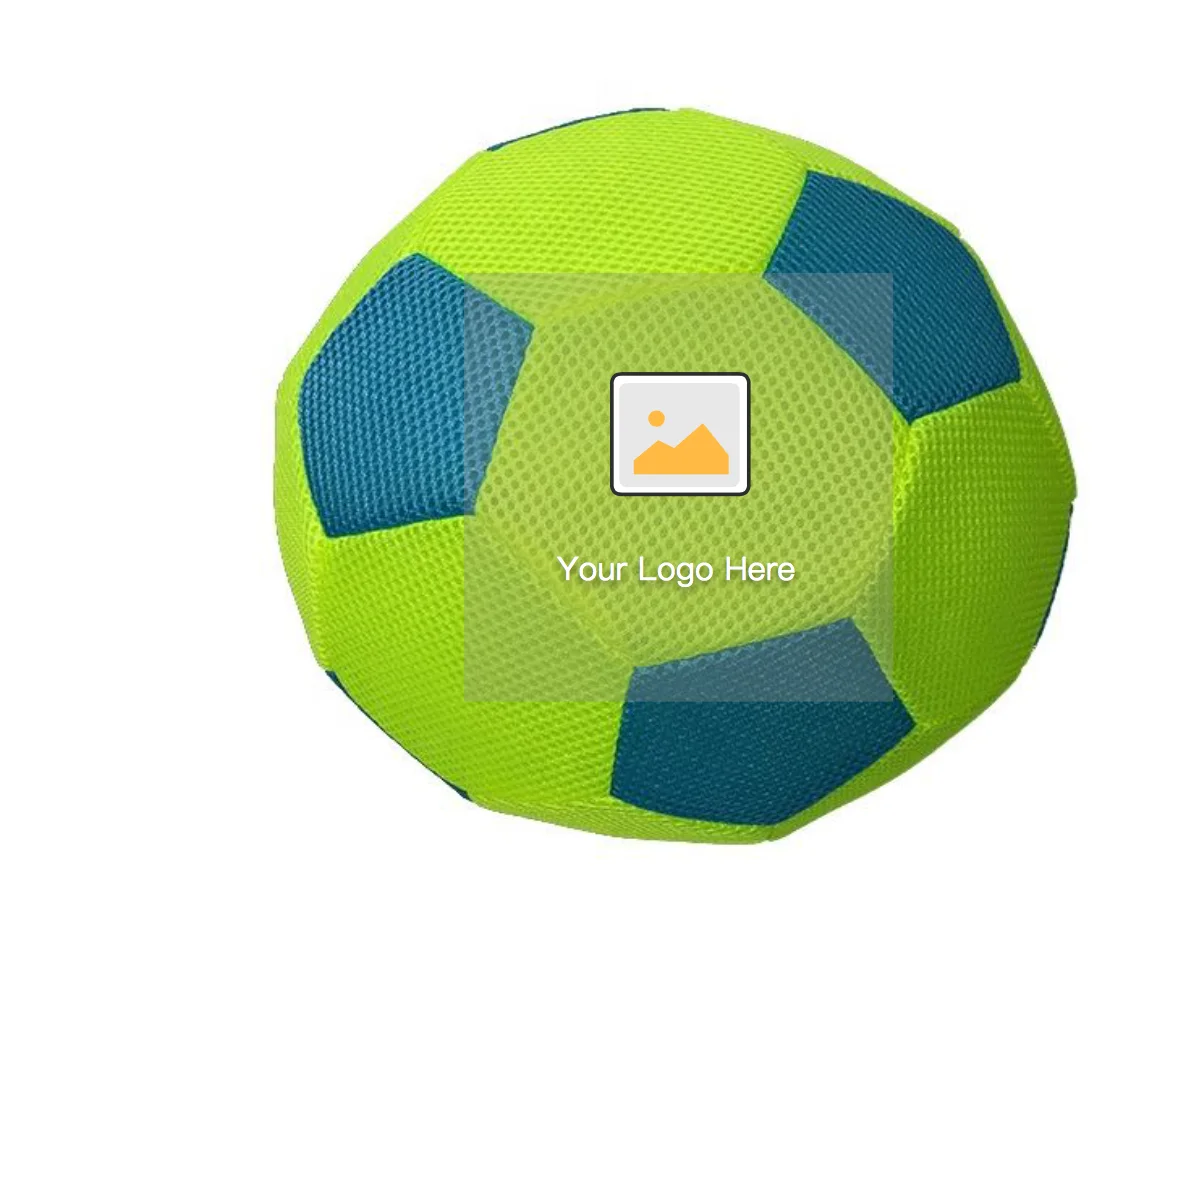 INFLATABLE SOCCER BALL WITH CHANGING COLORS 8.5" 